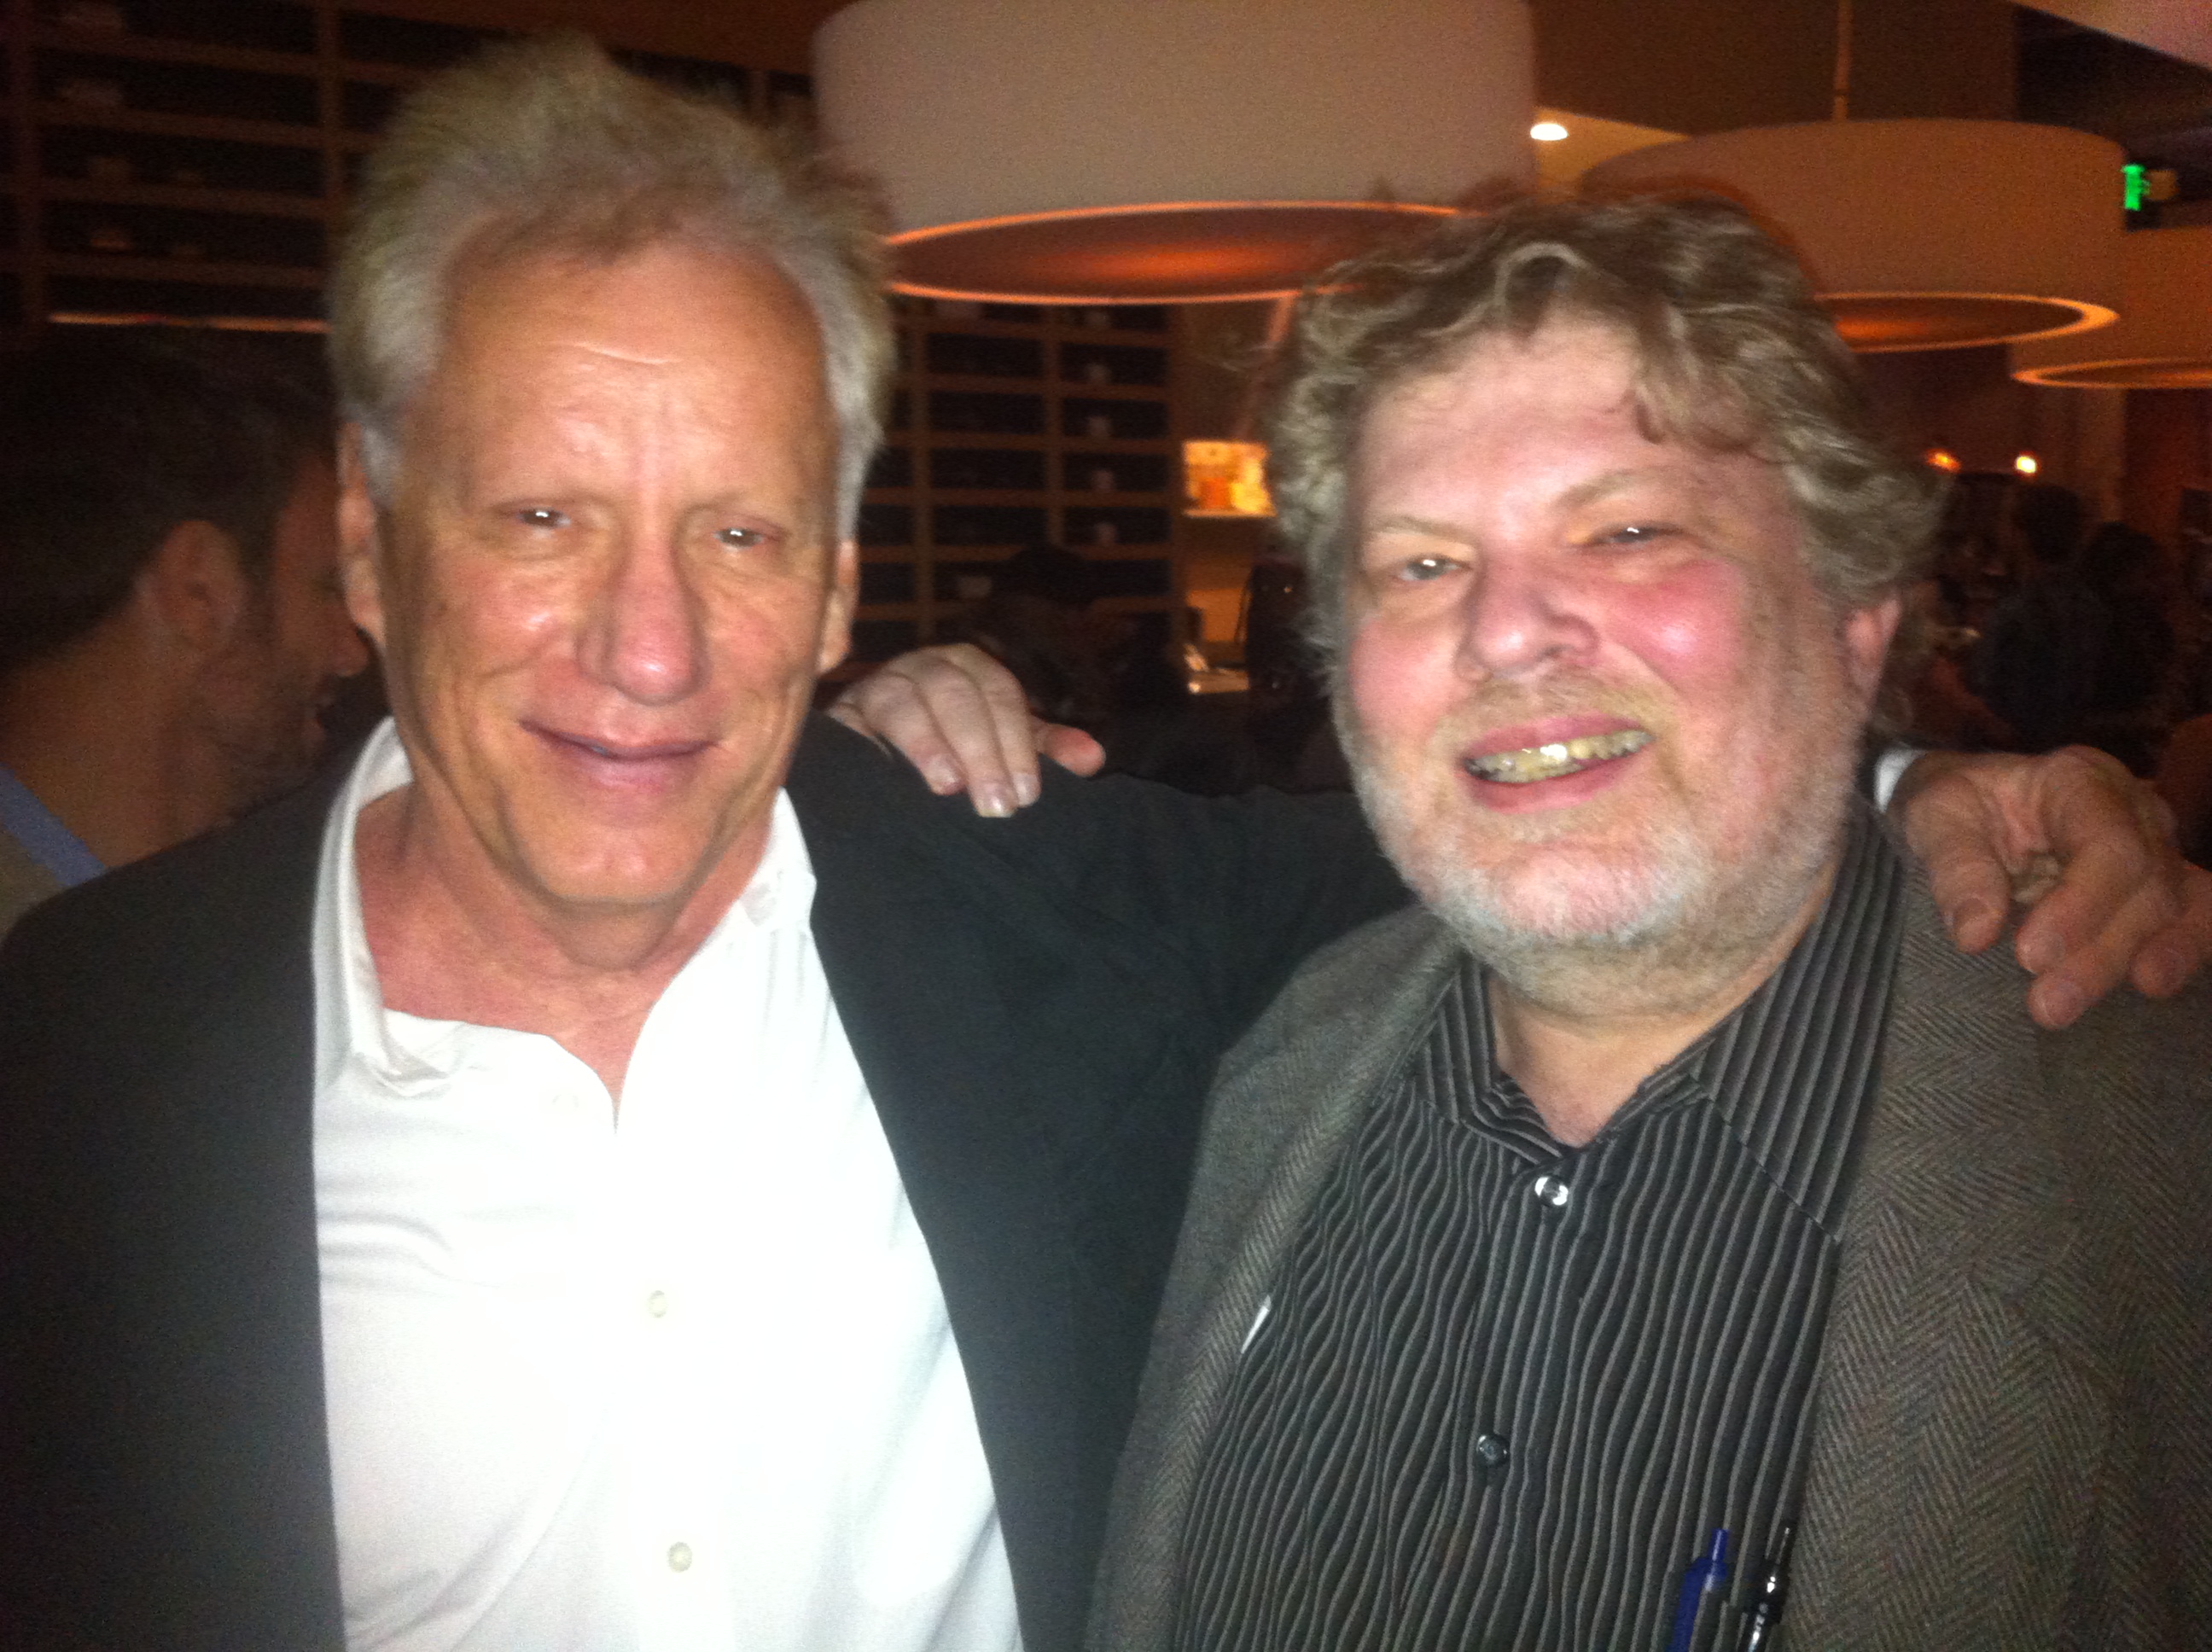 Joe Hansard as Tim in Jamesy Boy, with castmate James Woods at the Jamesy Boy wrap party in Baltimore.